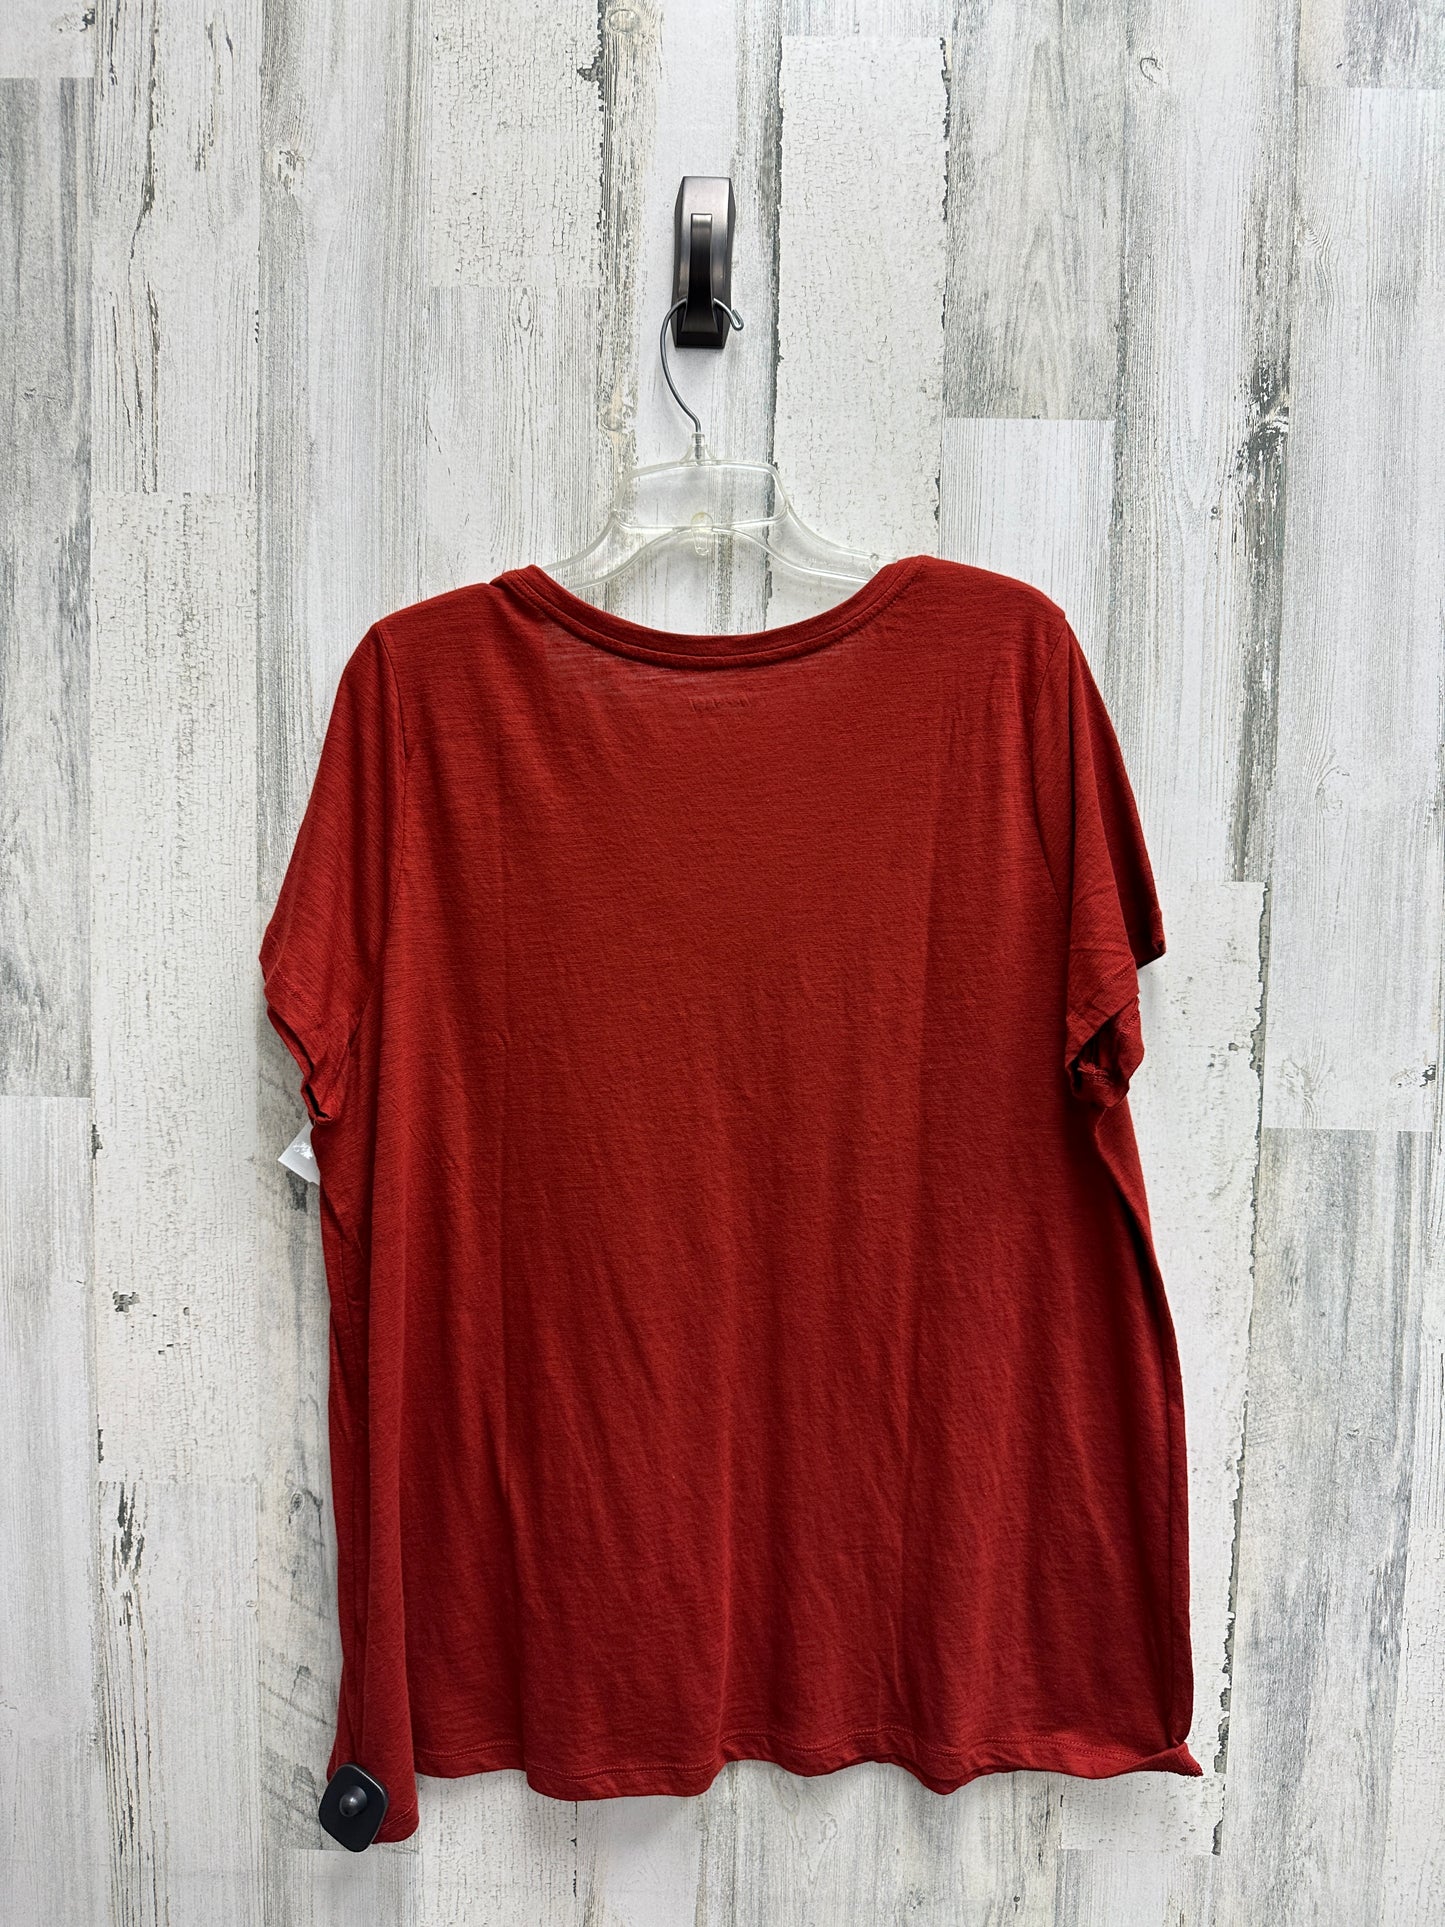 Top Short Sleeve By Ava & Viv  Size: 2x